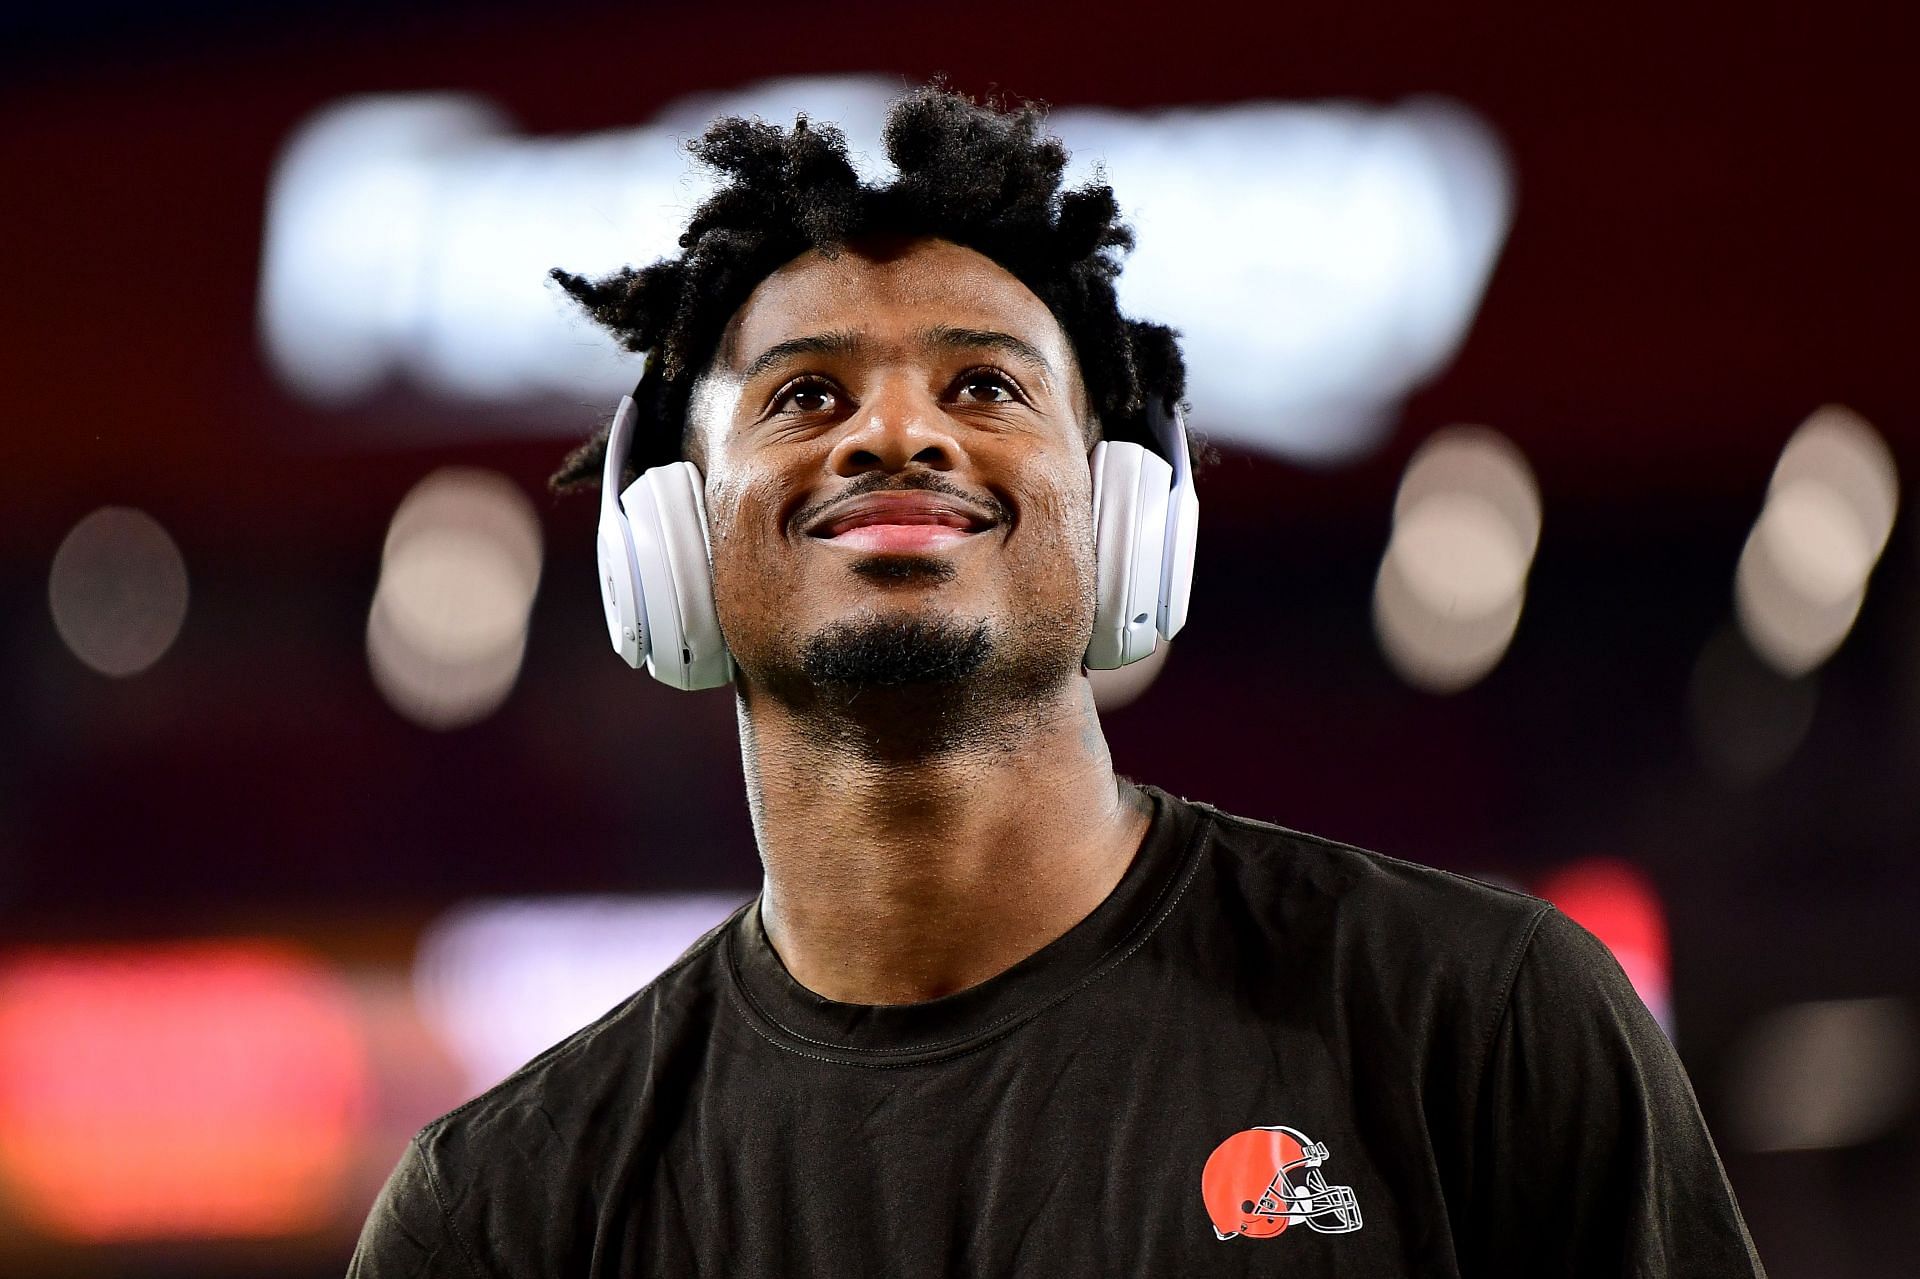 Wide receiver Rashard Higgins, #82 of the Cleveland Browns, warms up against the Denver Broncos at FirstEnergy Stadium on October 21, 2021 in Cleveland, Ohio.